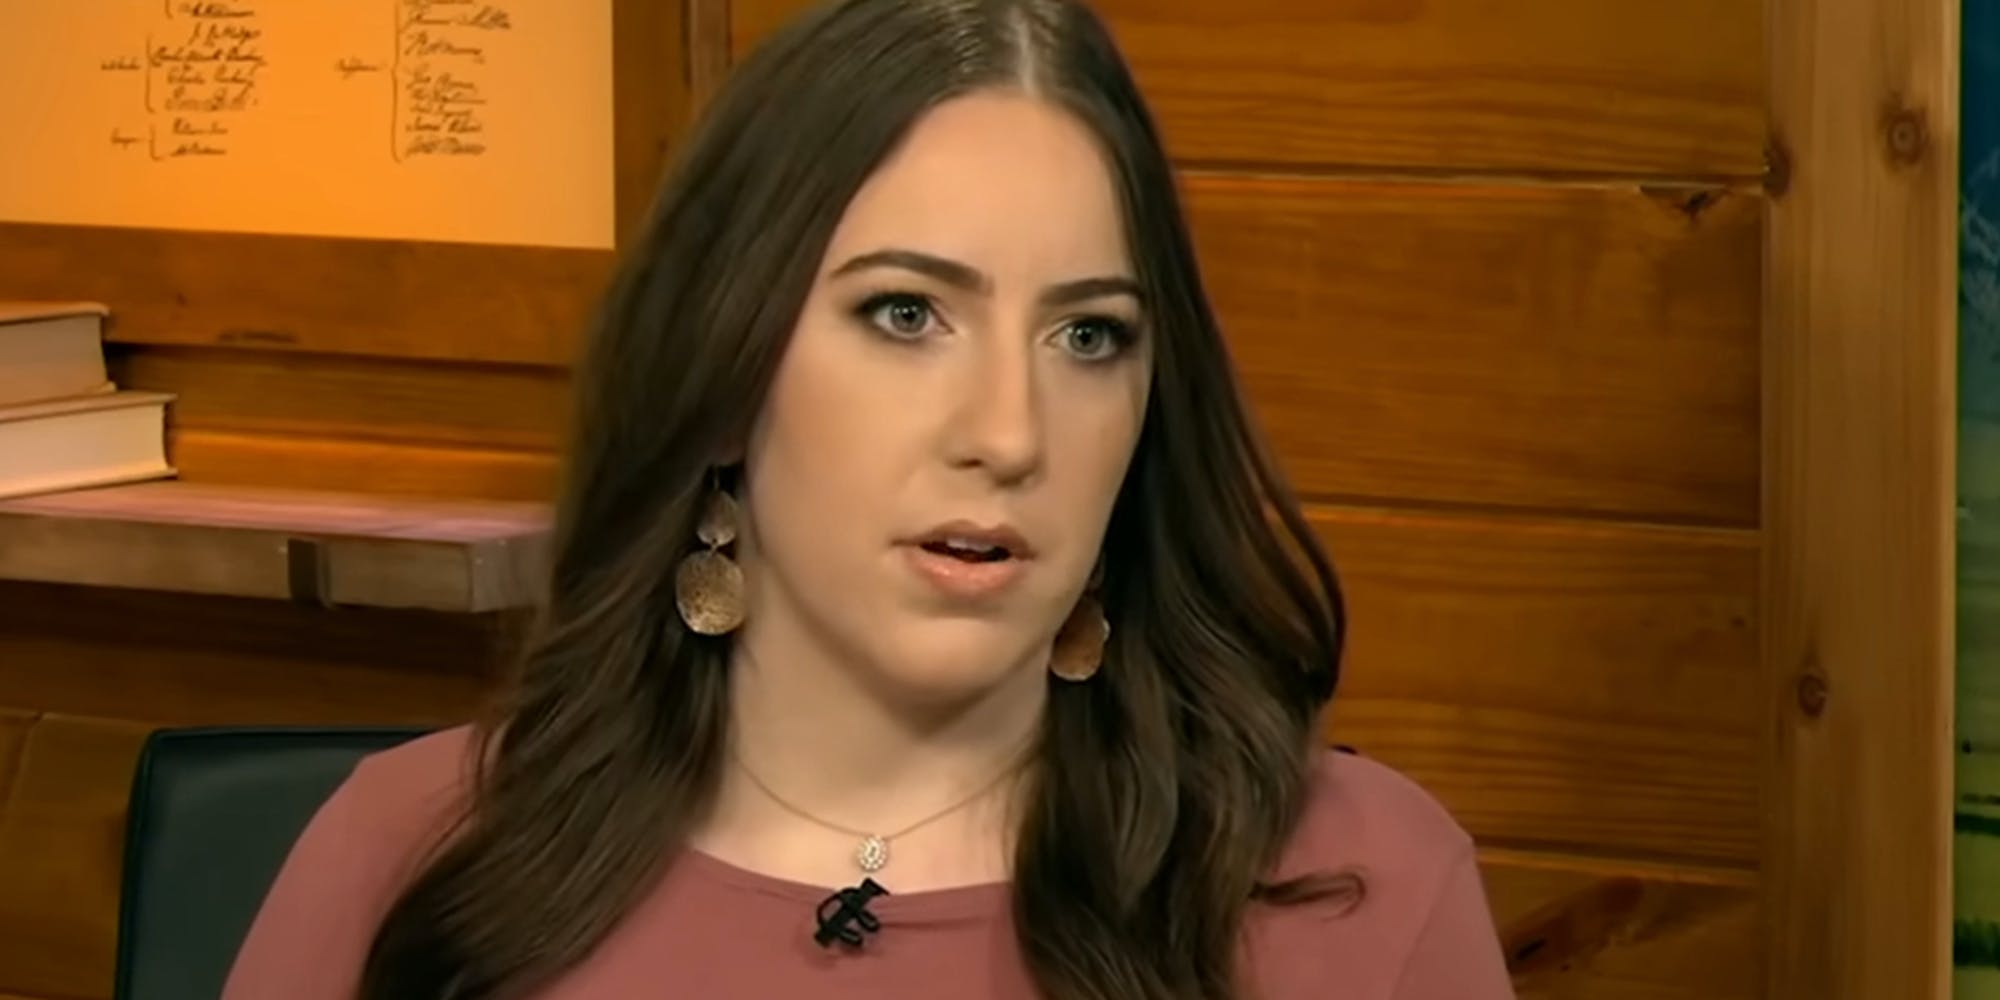 'I hope you stop': Libs of TikTok fans turn after she doxes over 50 people for Trump assassination comments